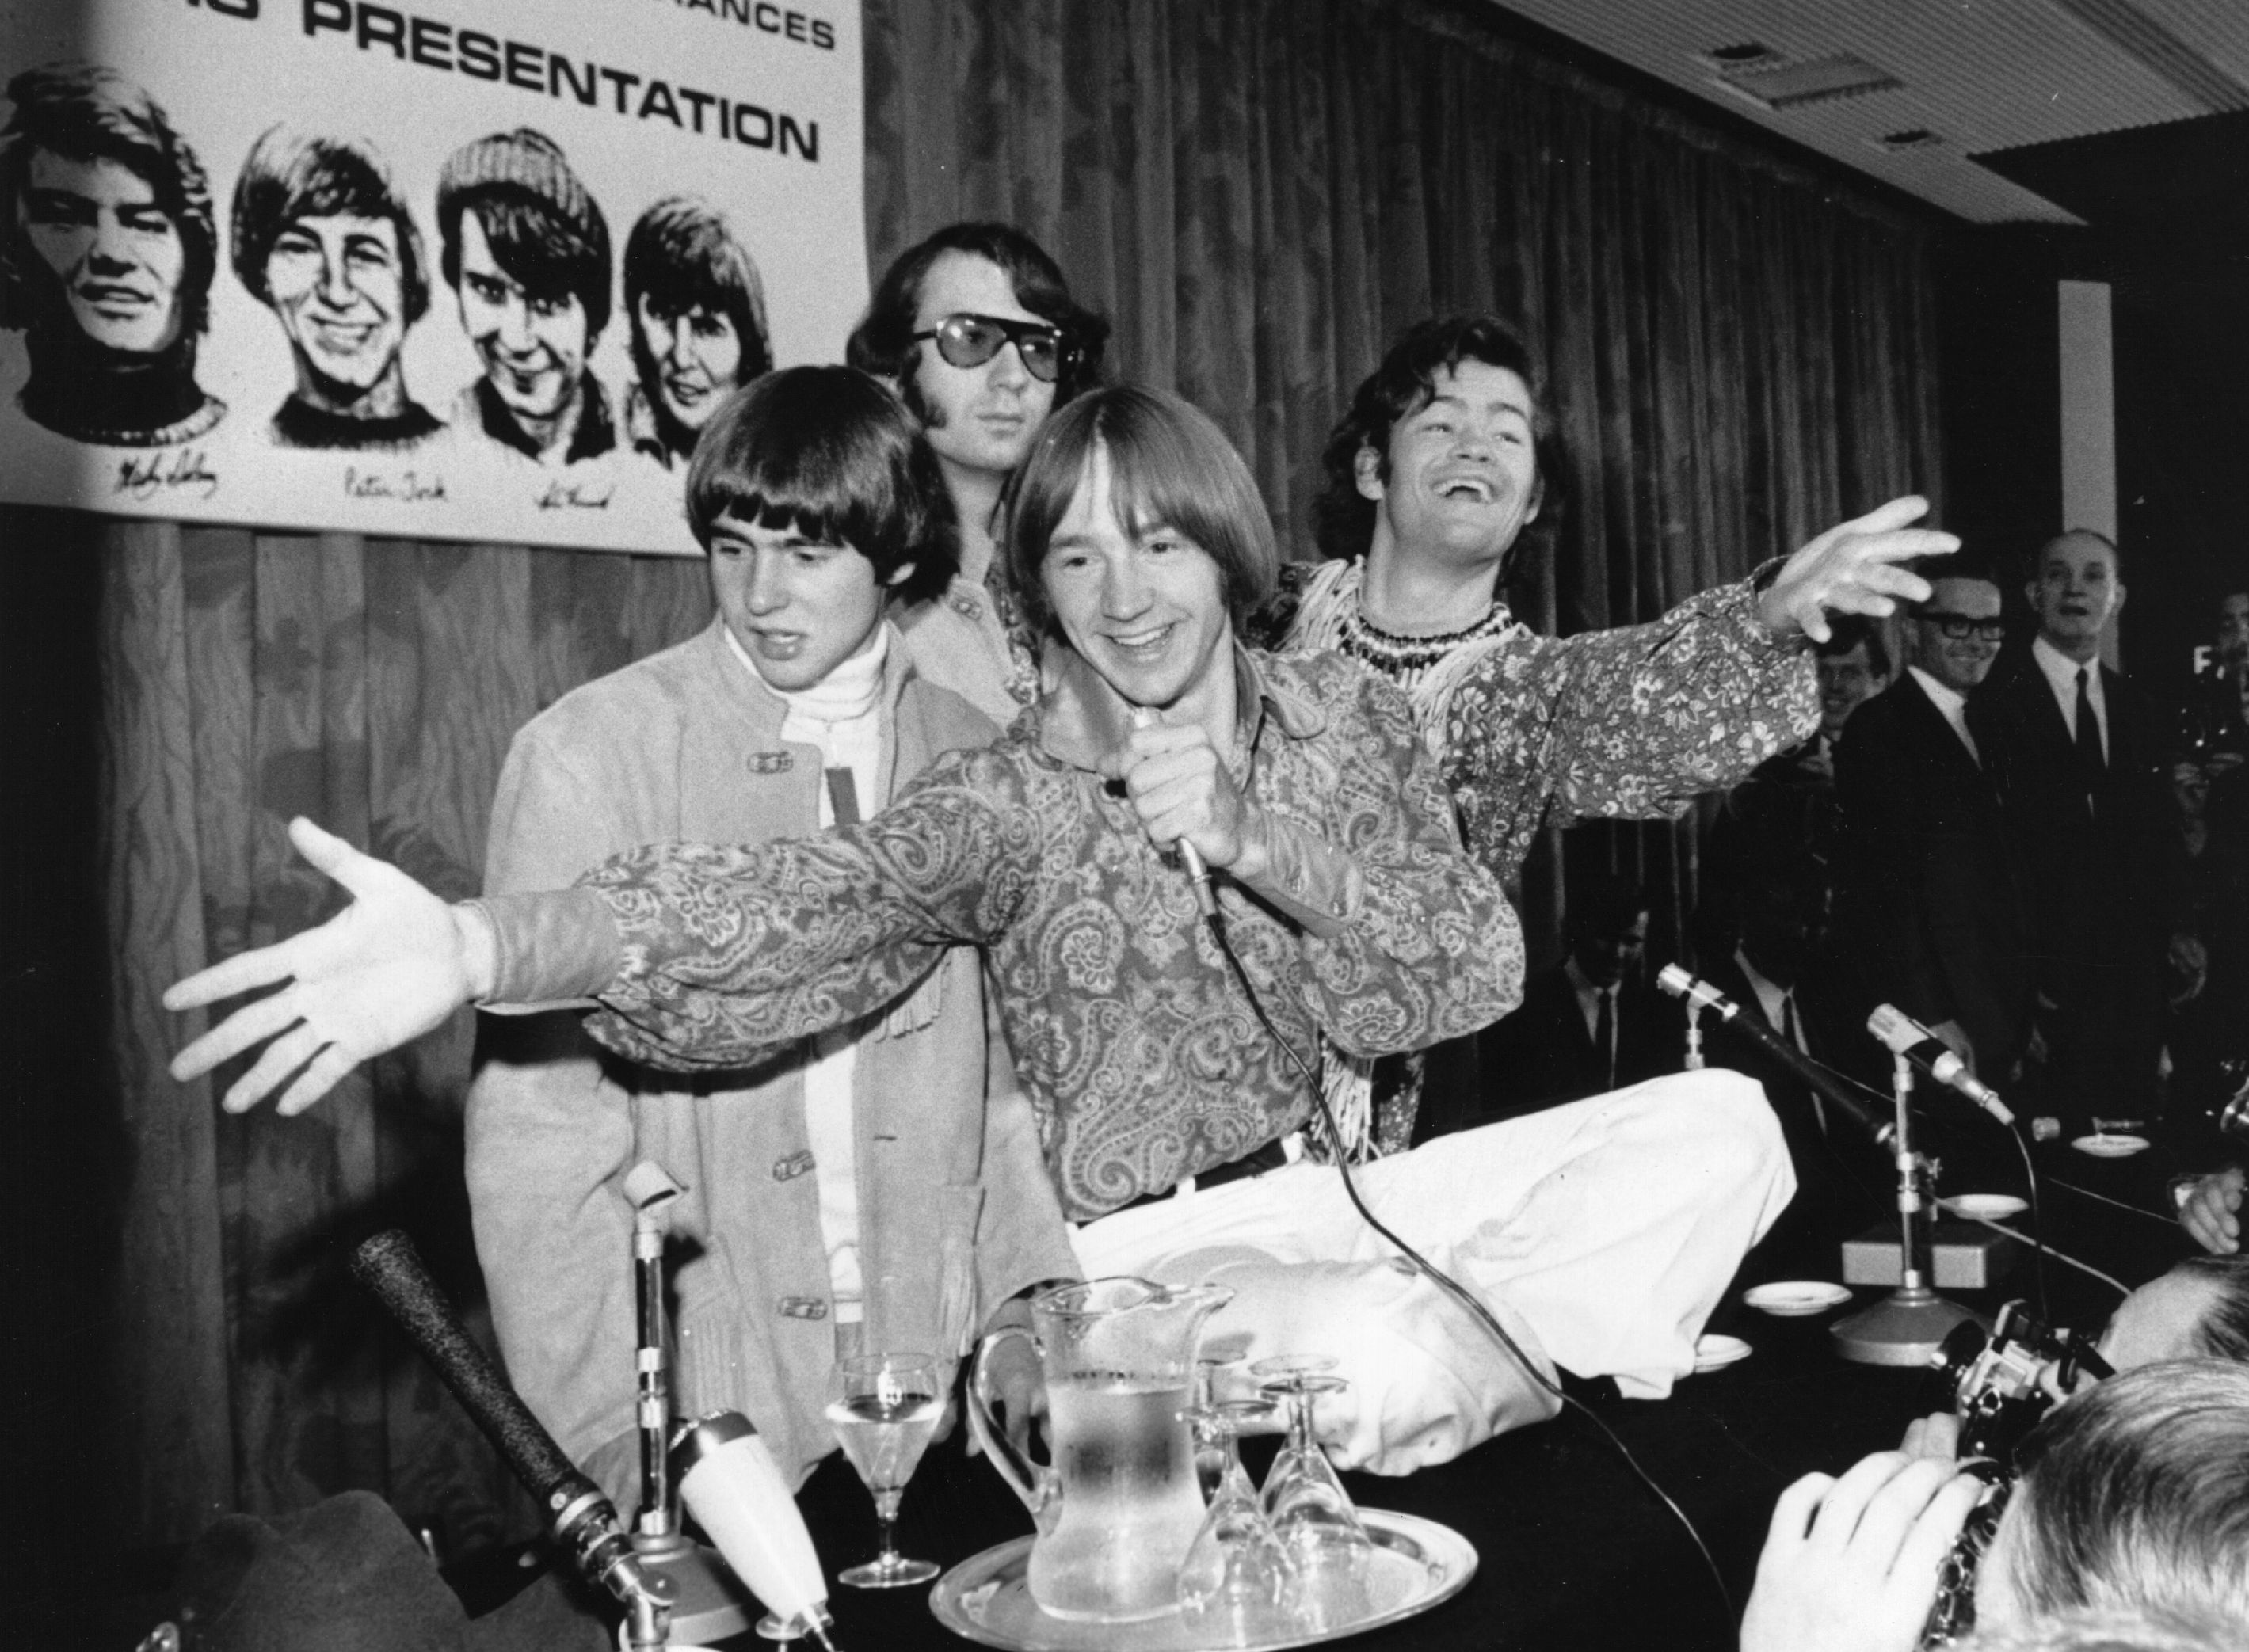 The Monkees at a press conference